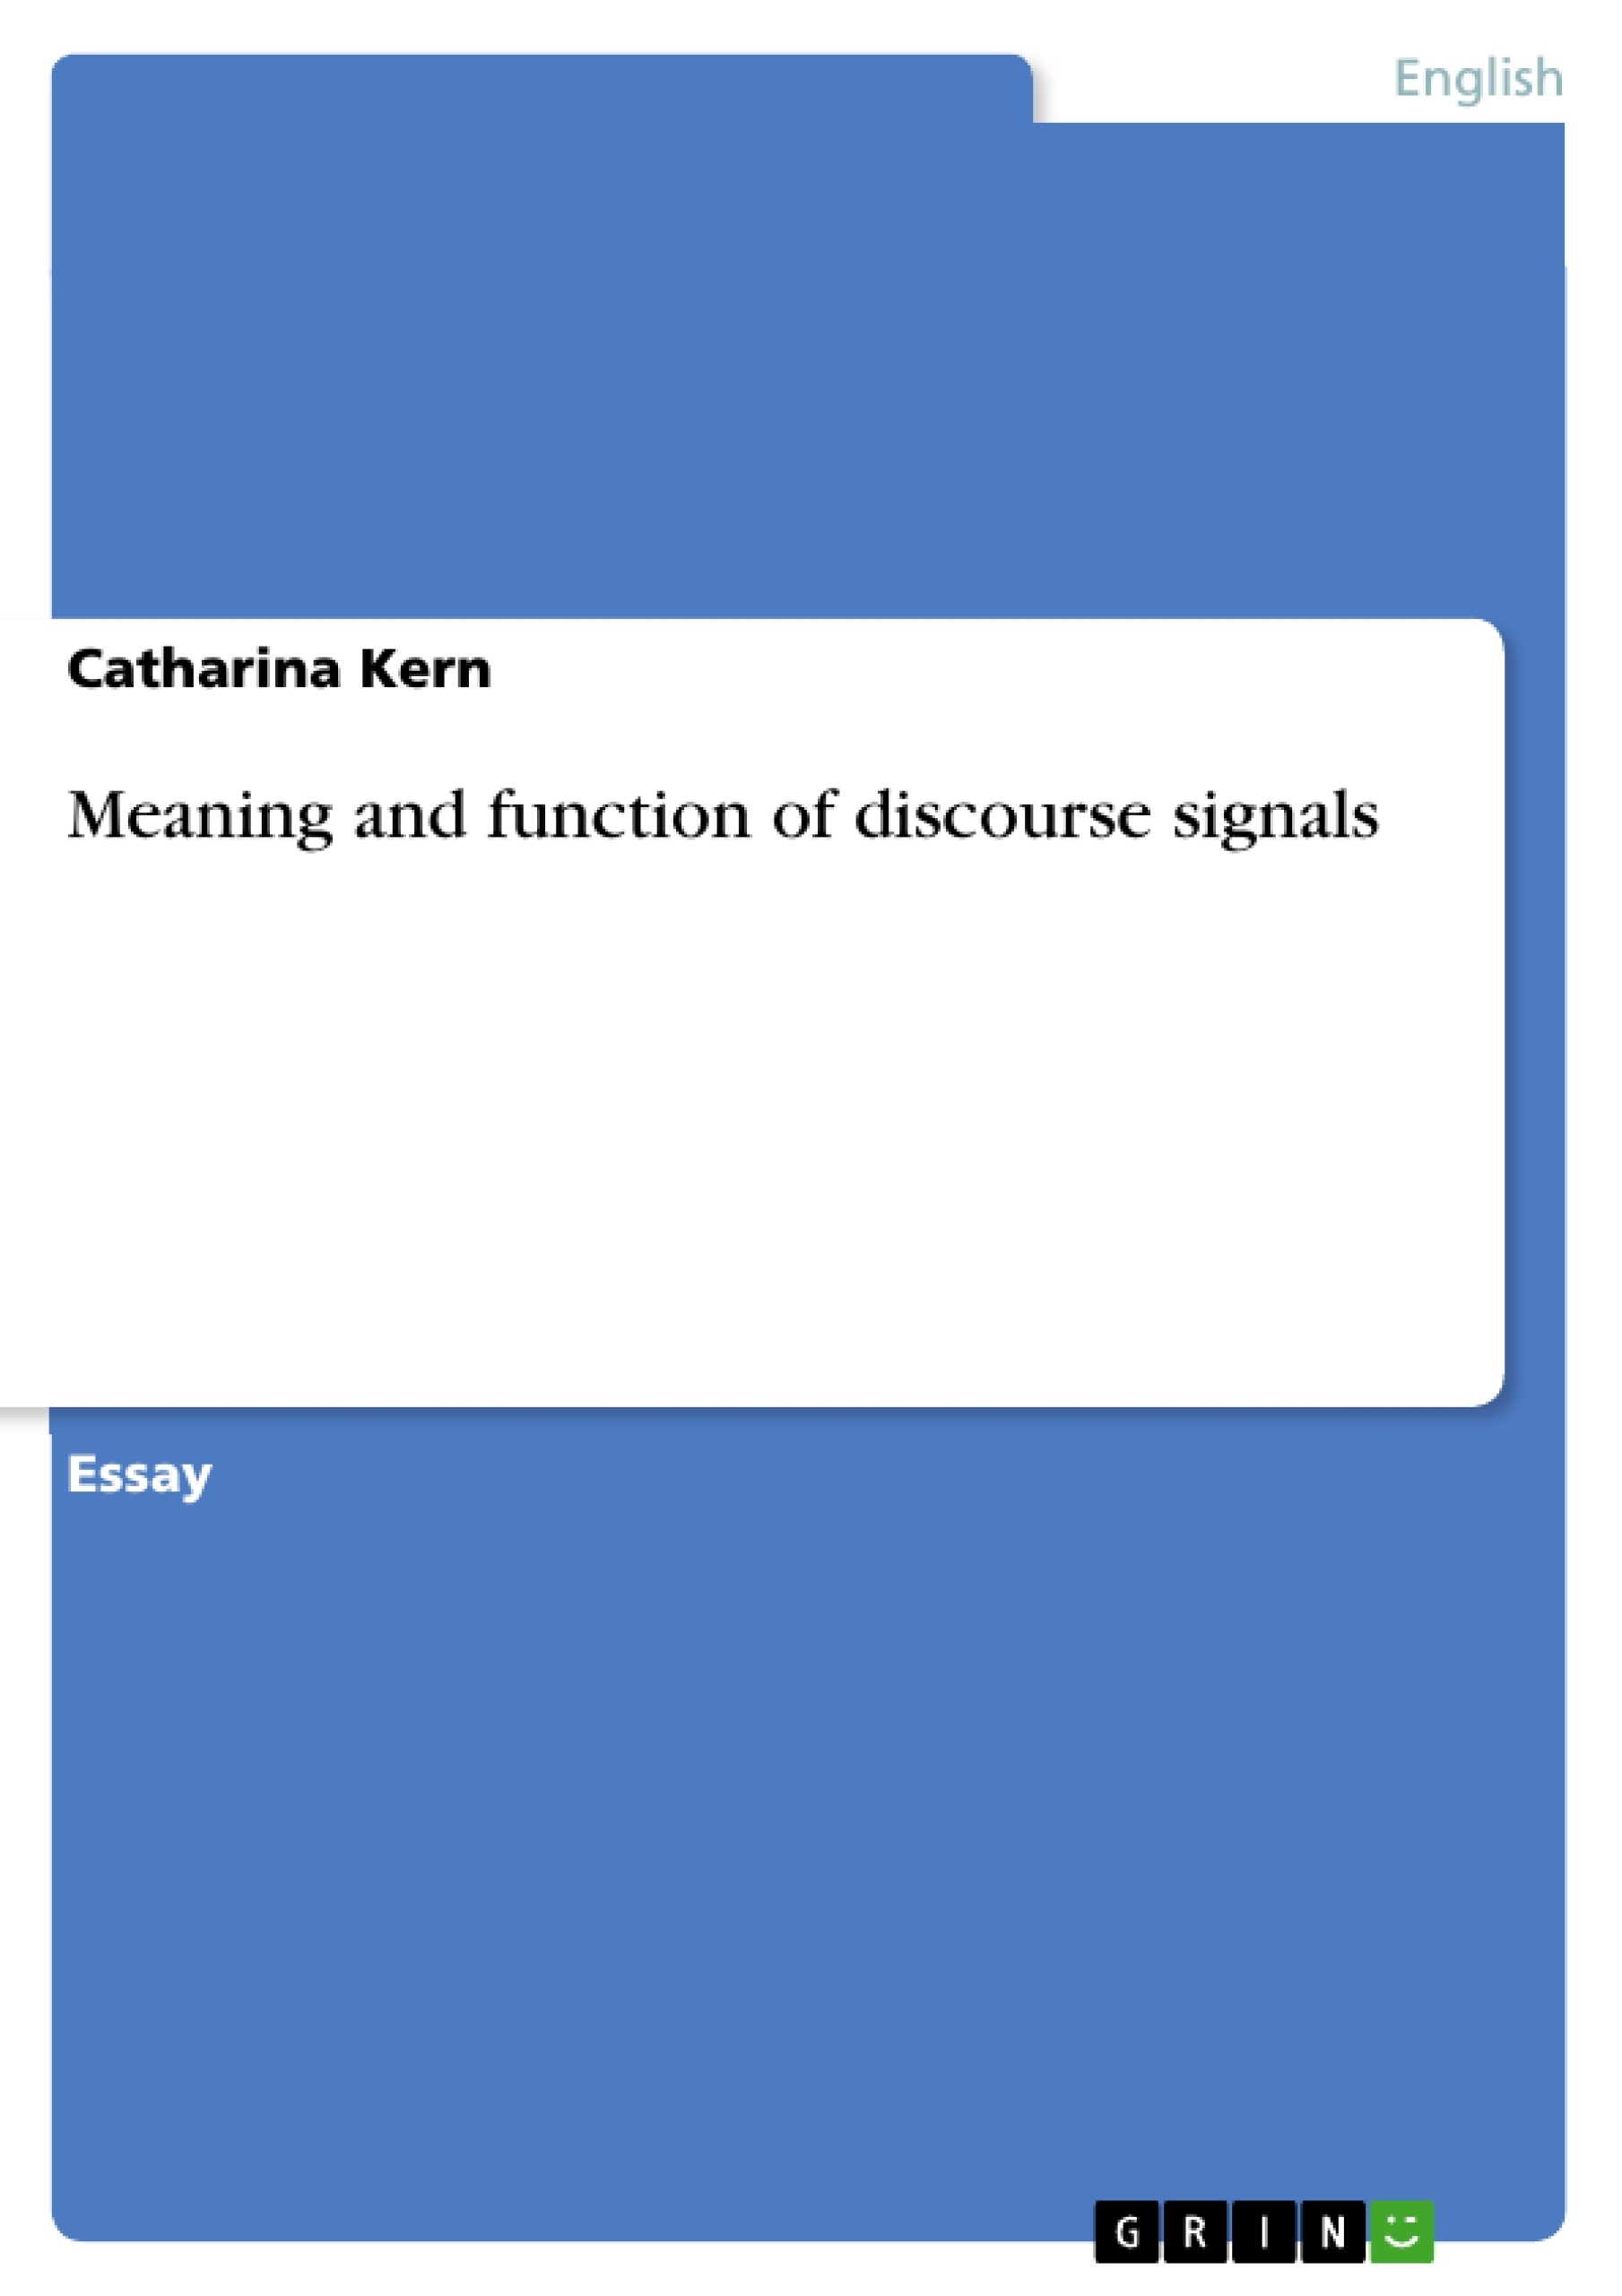 Title: Meaning and function of discourse signals